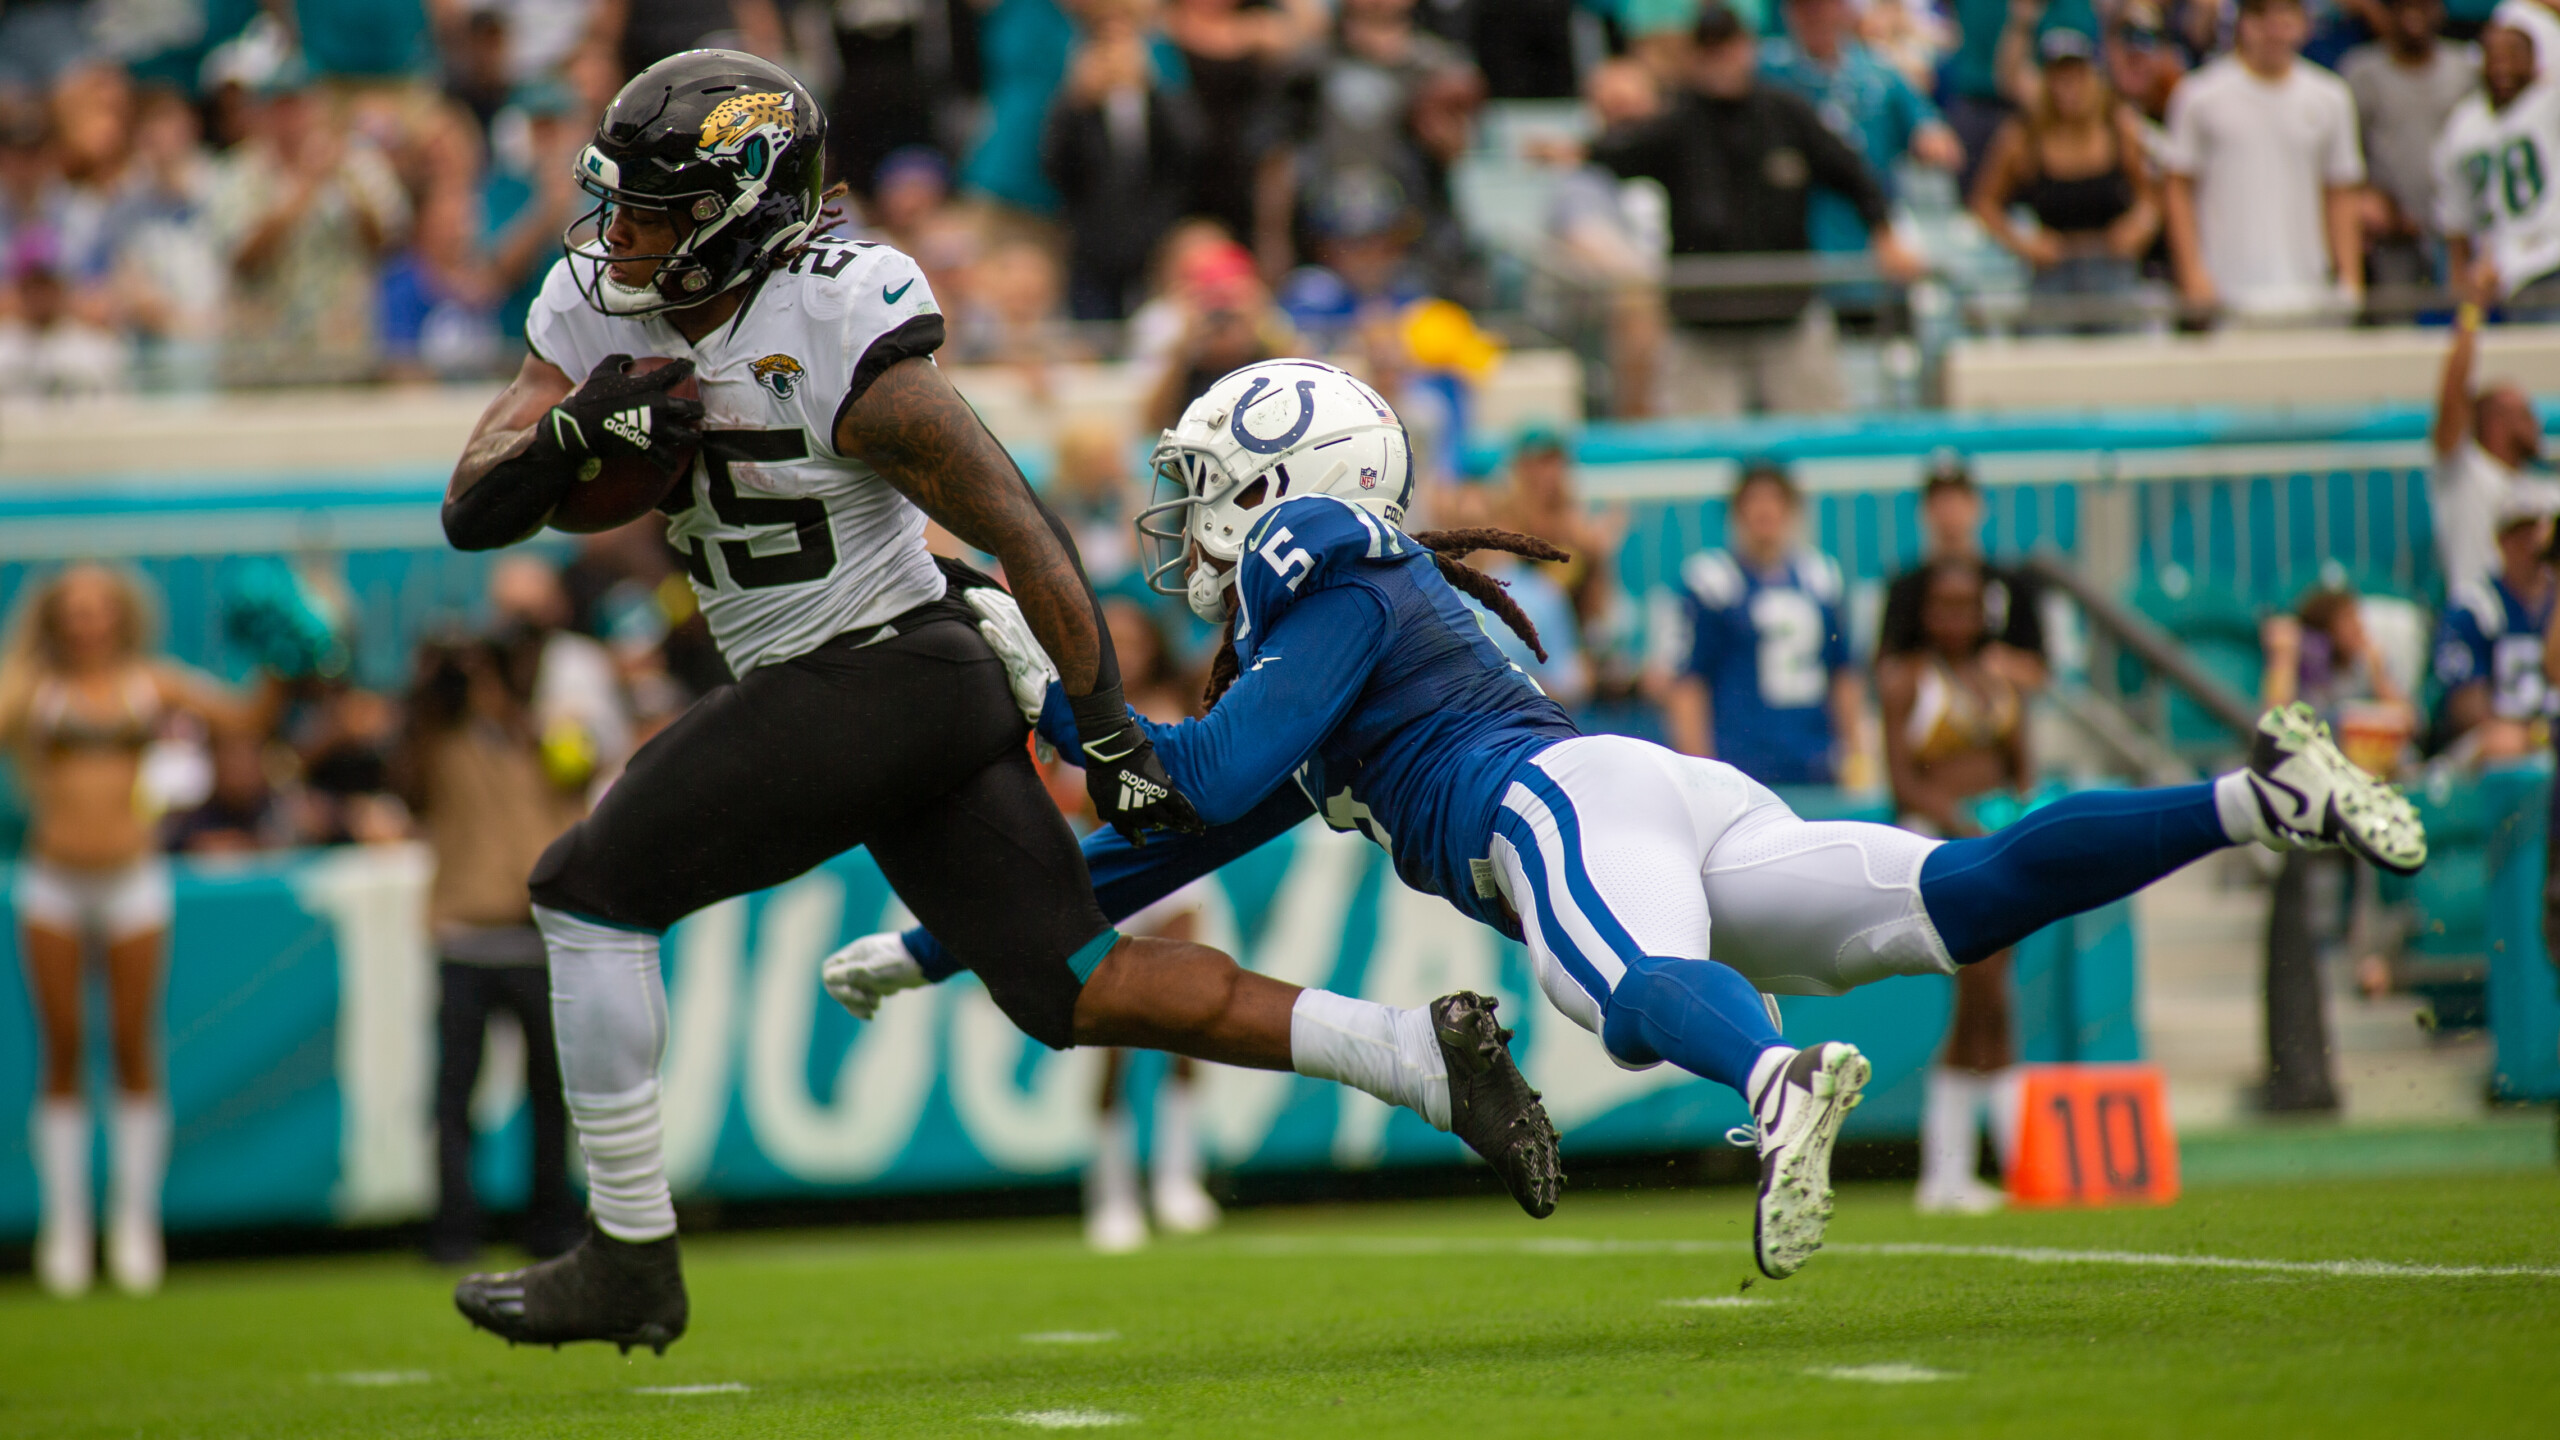 Featured image for “PHOTO ESSAY | Jaguars win home opener shutout”